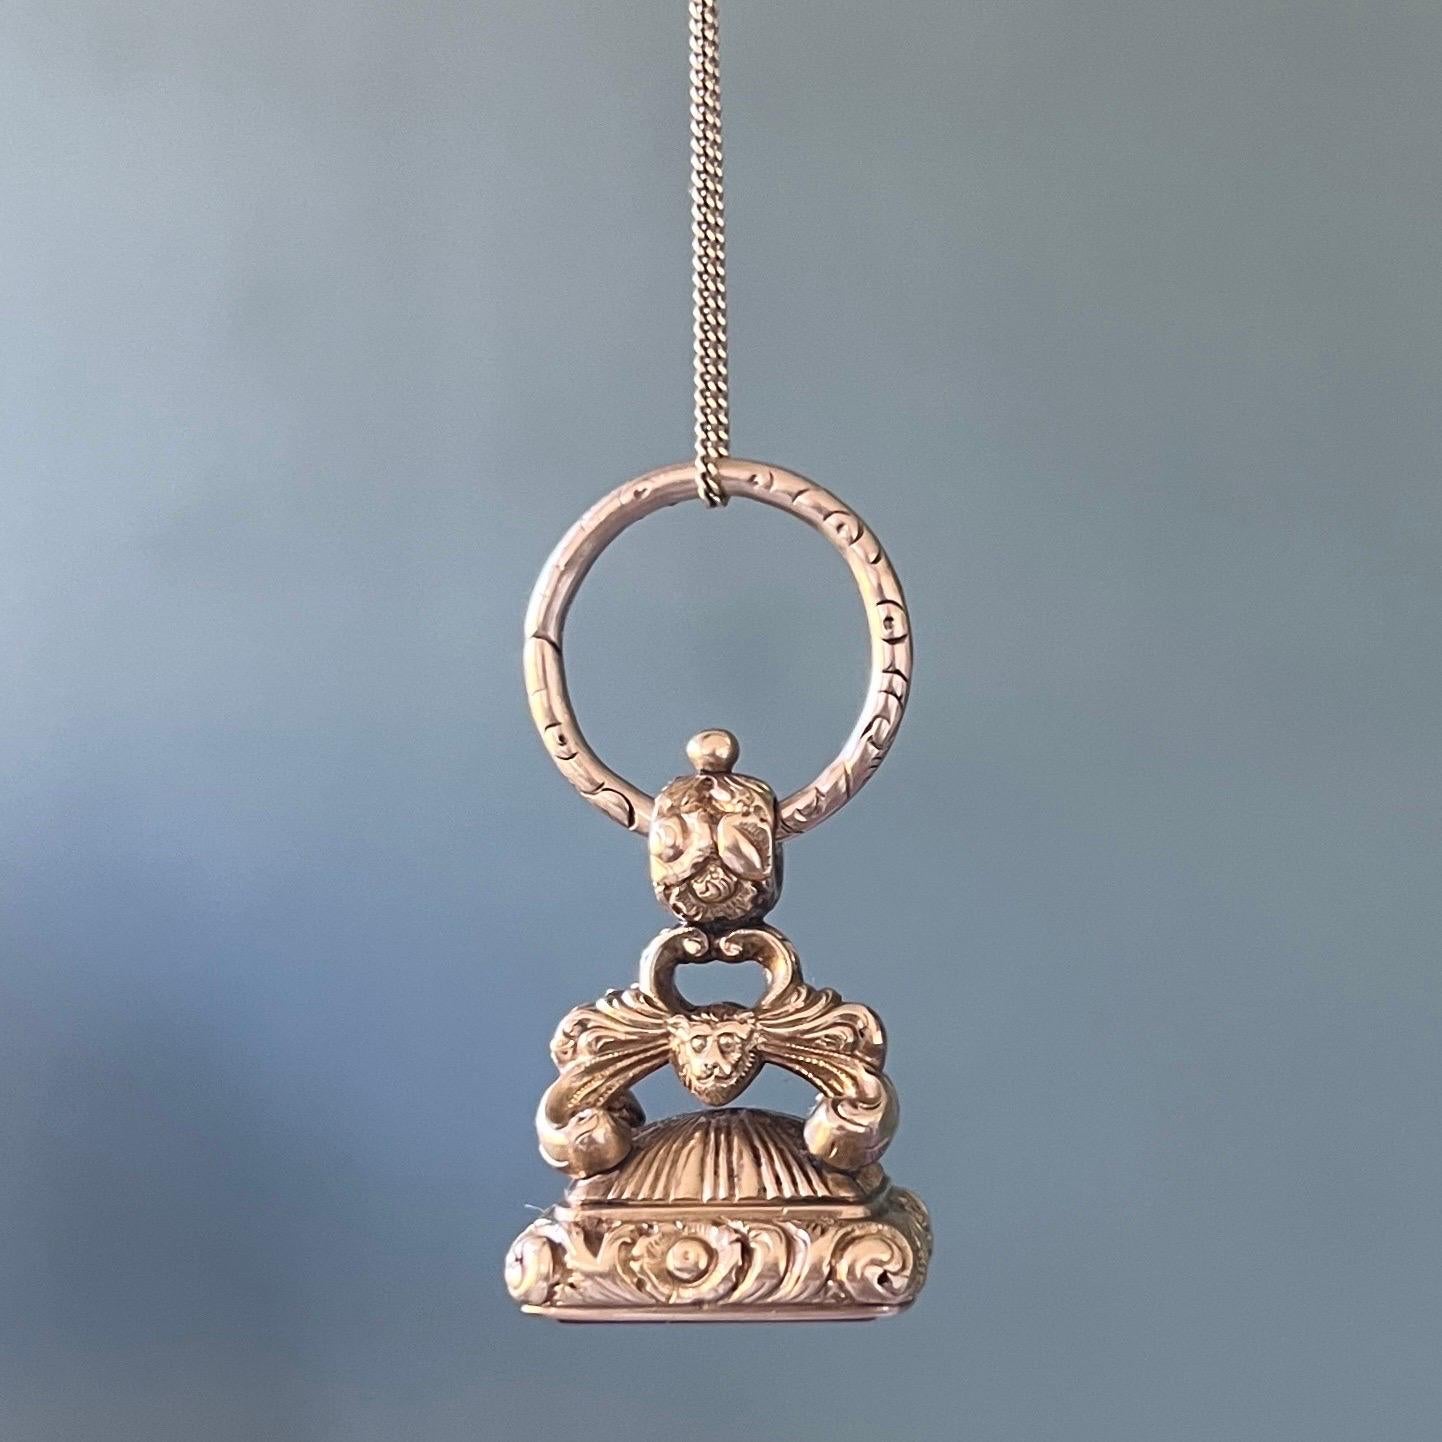 An antique early Victorian 15 karat gold and carnelian fob pendant. This beautiful ornate fob with lions head and scrolling arches leading to an integral bail attached to a gold split ring. The large split ring is embellished with deeply carved